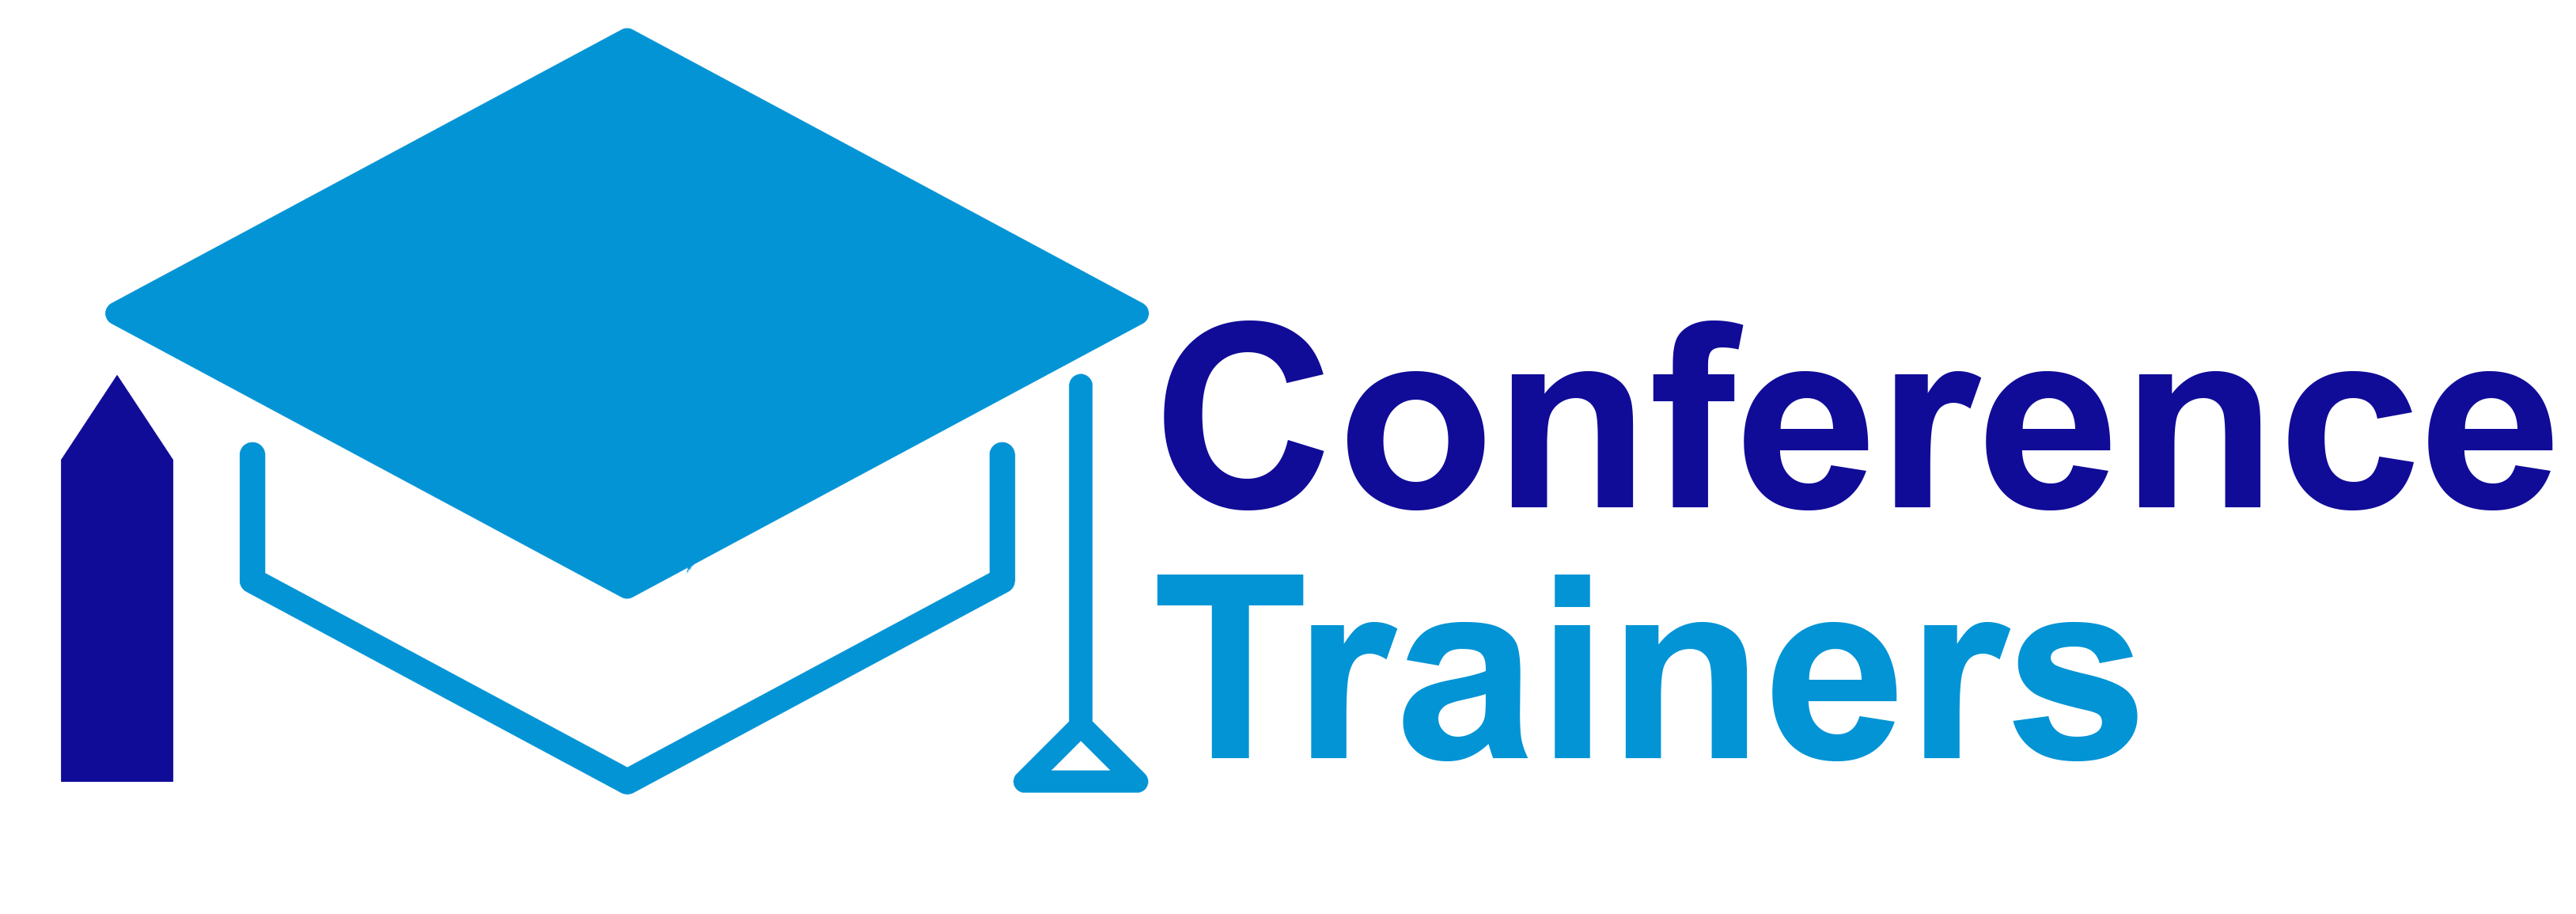 conferencetrainers